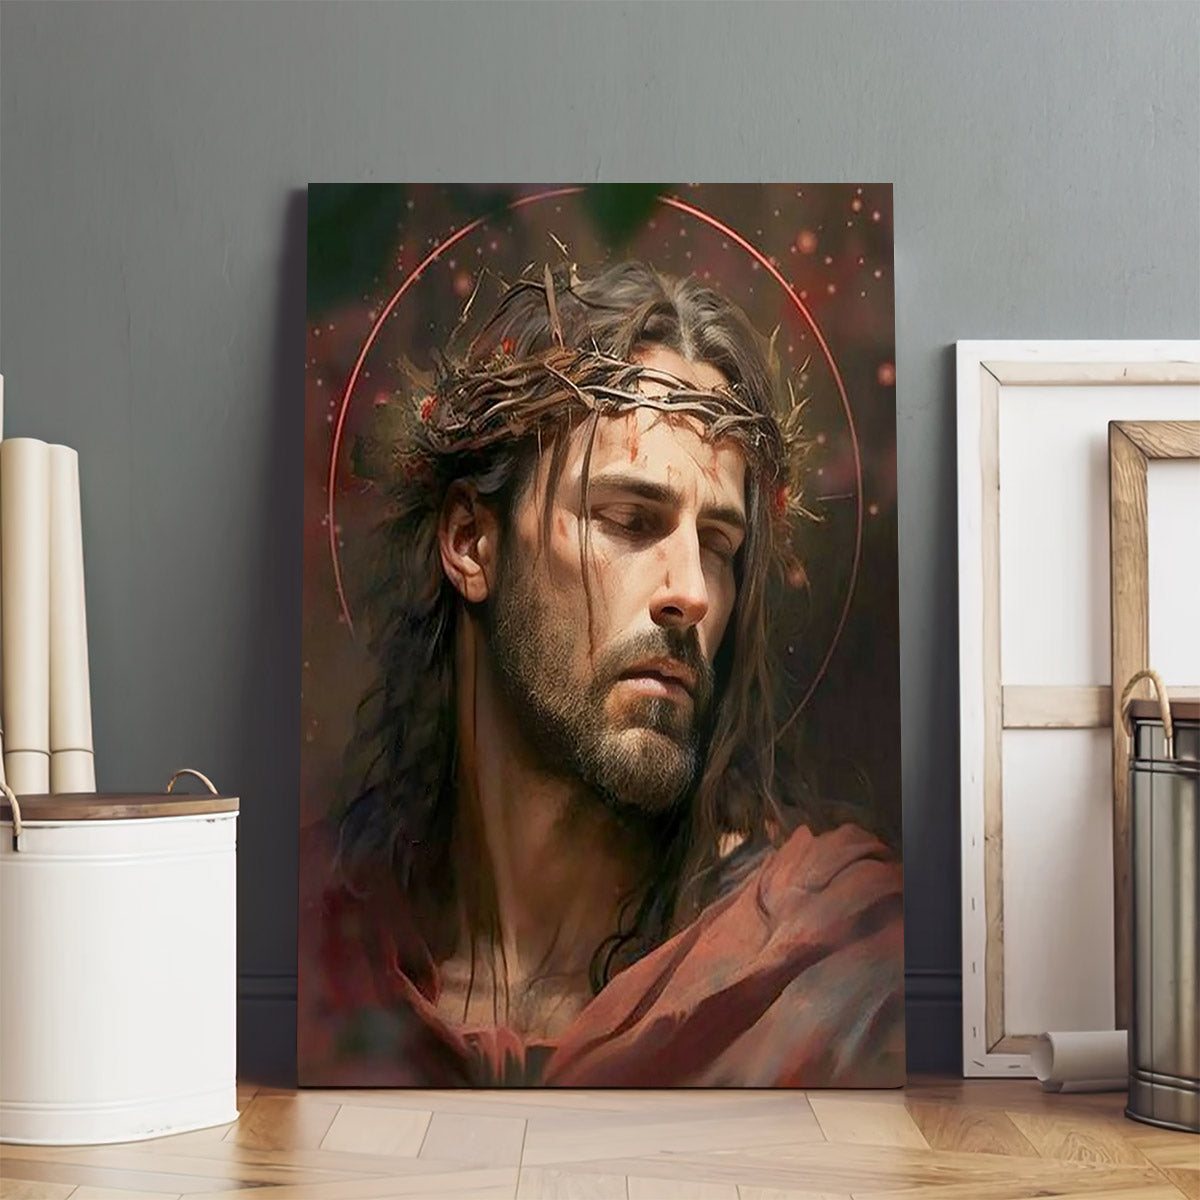 Jesus Crowned With Thorns Canvas Prints - Jesus Christ Art - Christian Canvas Wall Decor